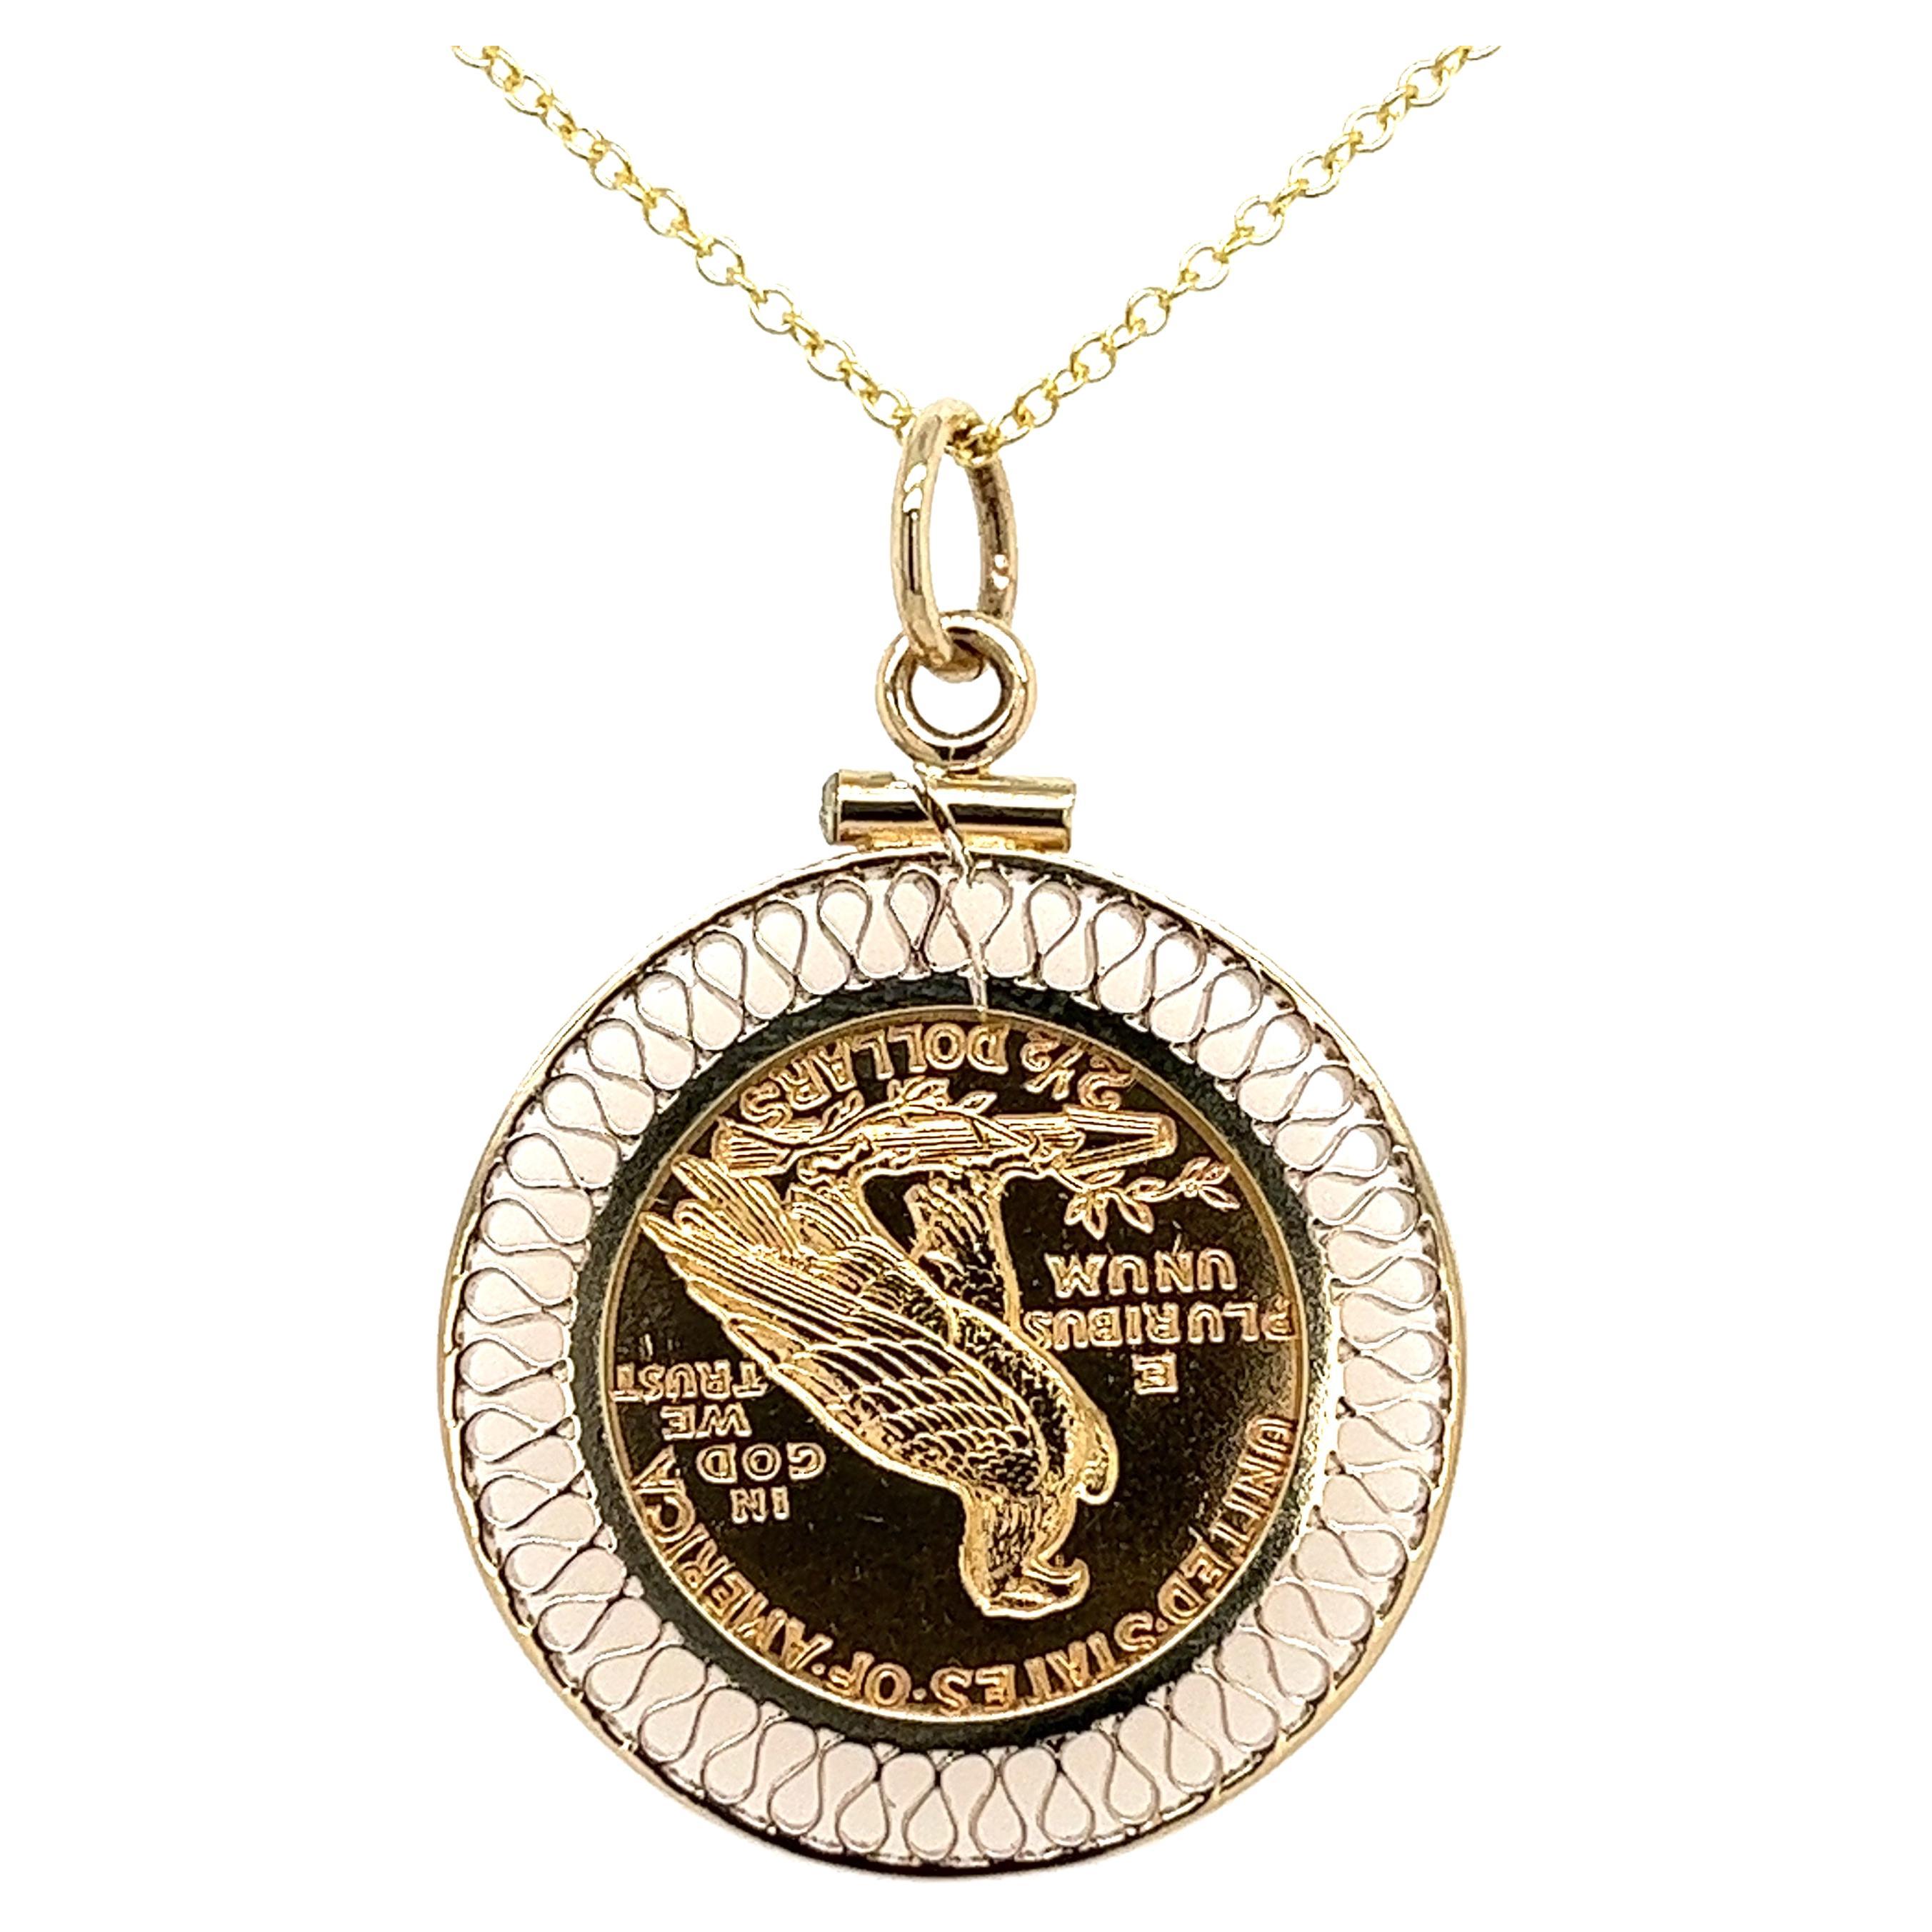 This 14K yellow gold pendant features a bezel set vintage quarter eagle 2.5 dollar US gold coin. The pendant is made of solid 14K yellow gold and the coin is securely held in place by a bezel setting, adding a unique touch to this piece of jewelry.